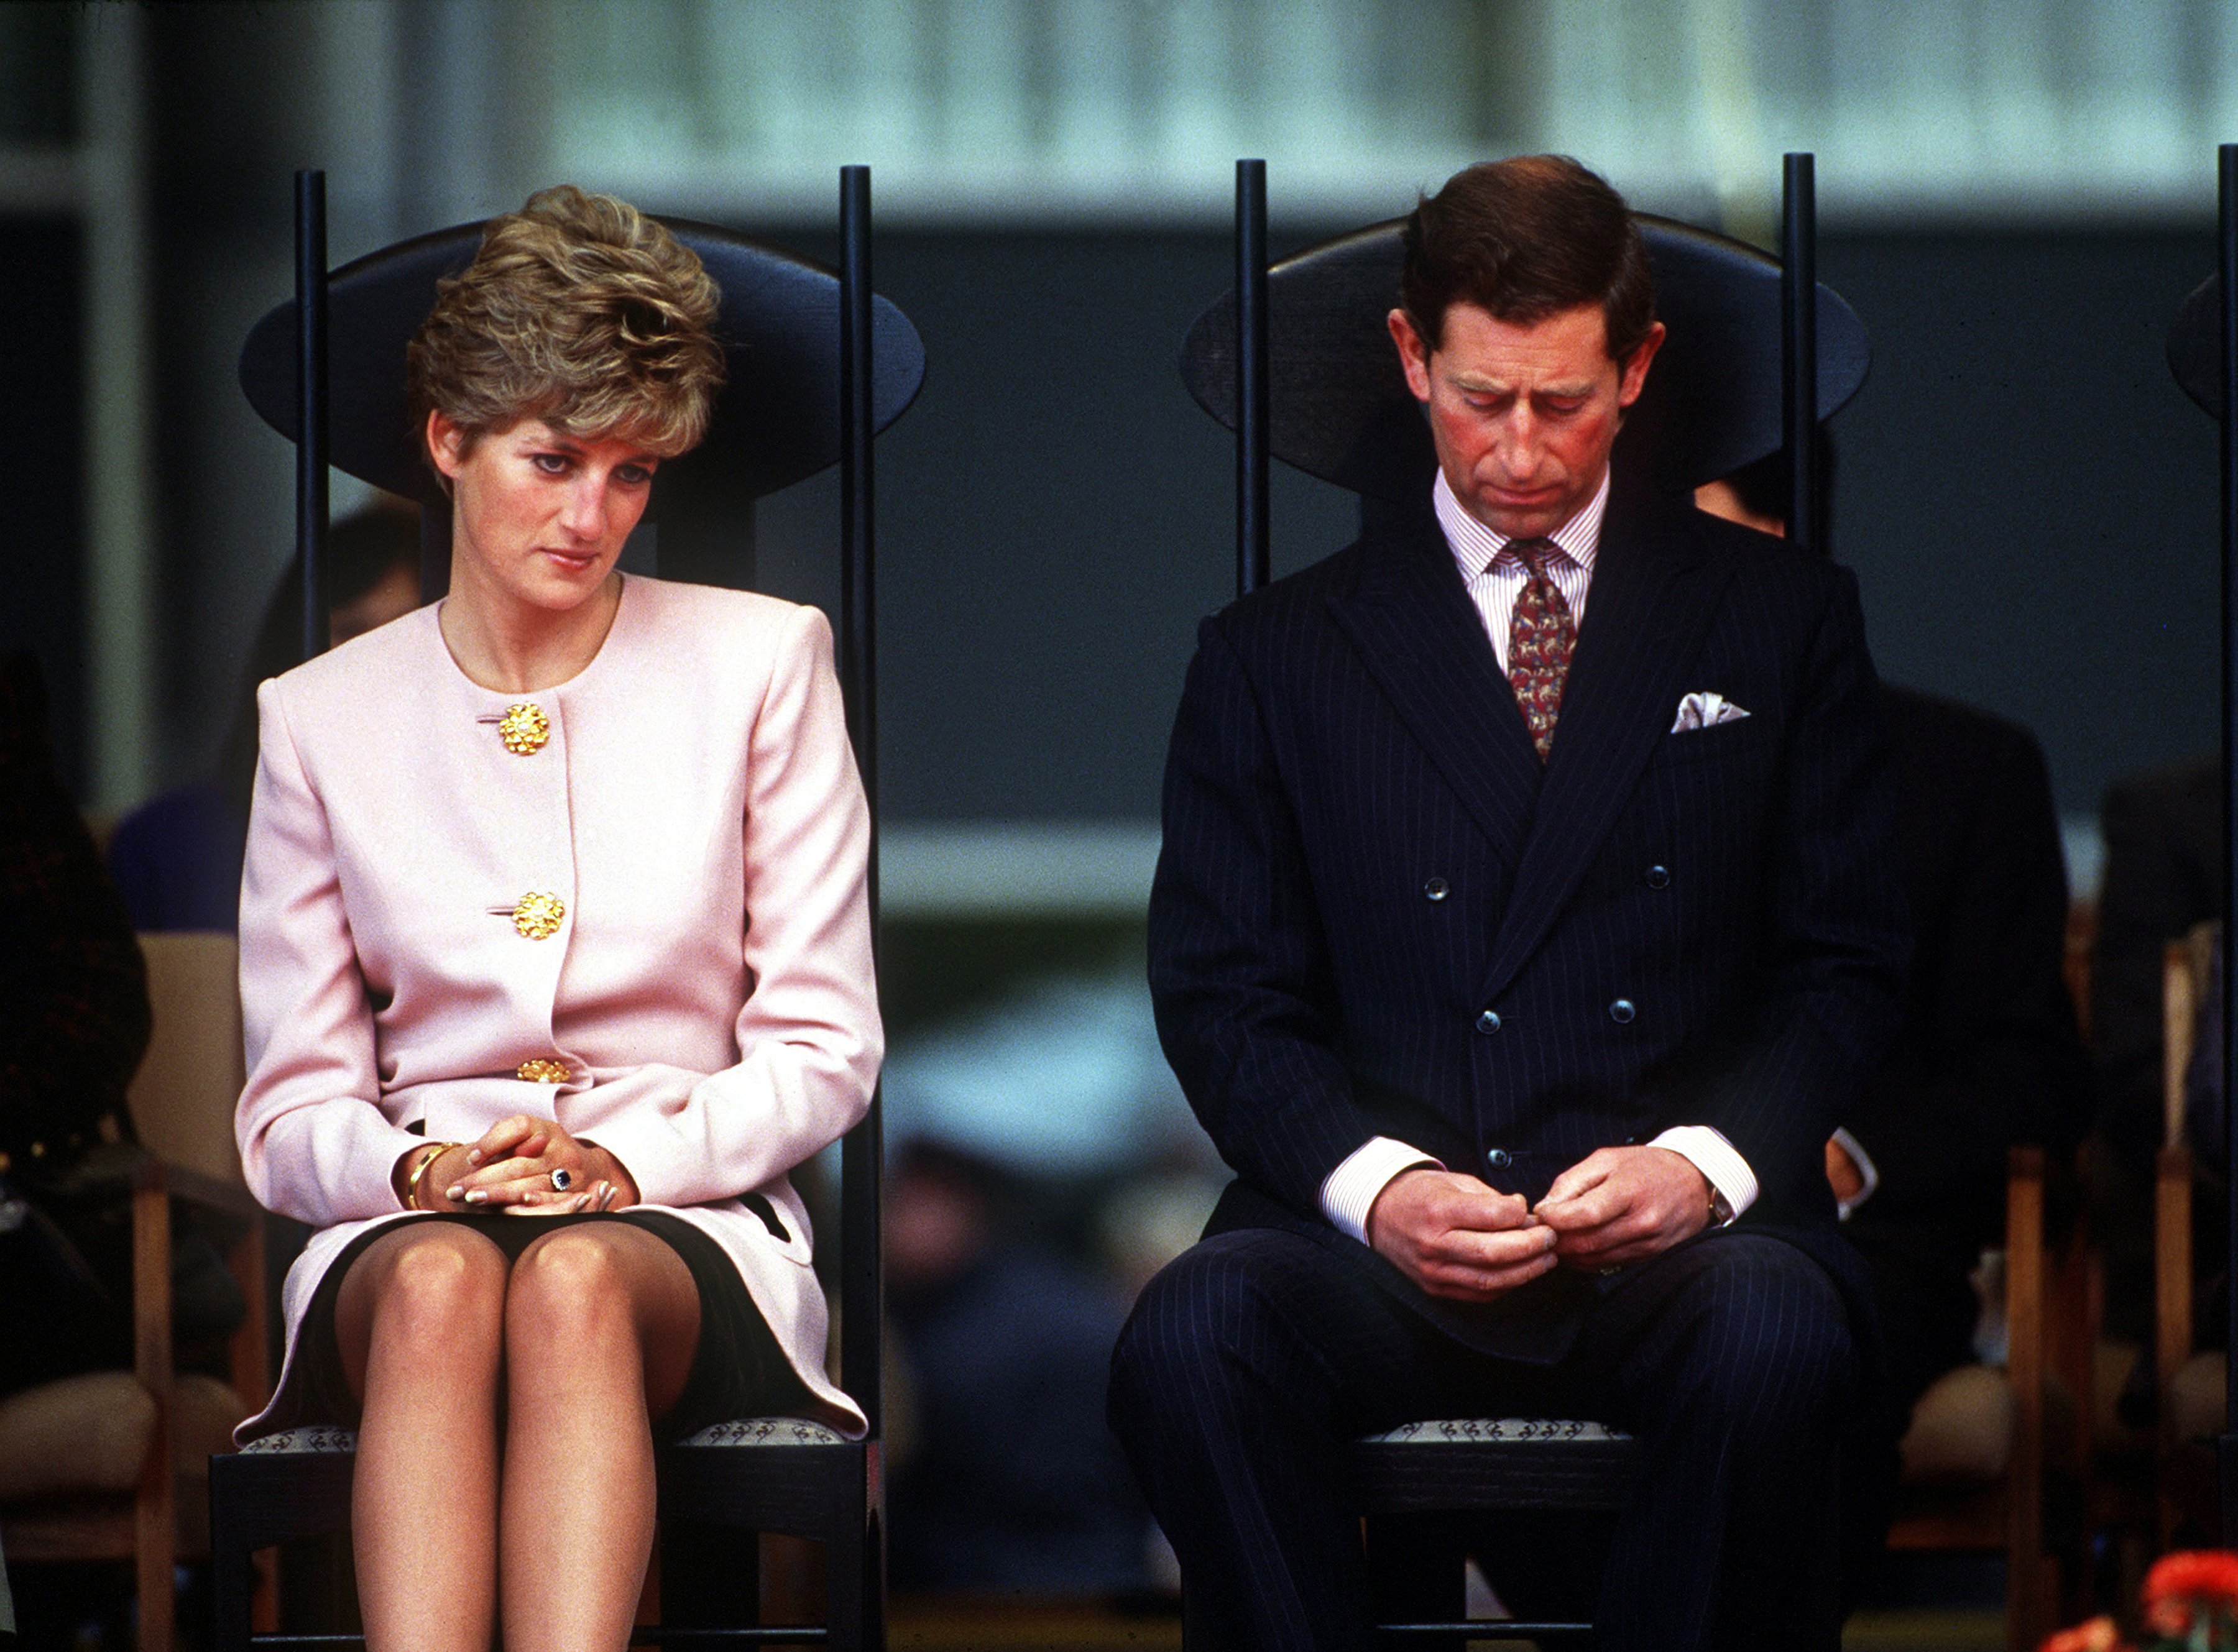 Princess Diana and Prince Charles during a welcome ceremony in Toronto at the beginning of their Canadian tour in October 1991.┃Source: Getty Images